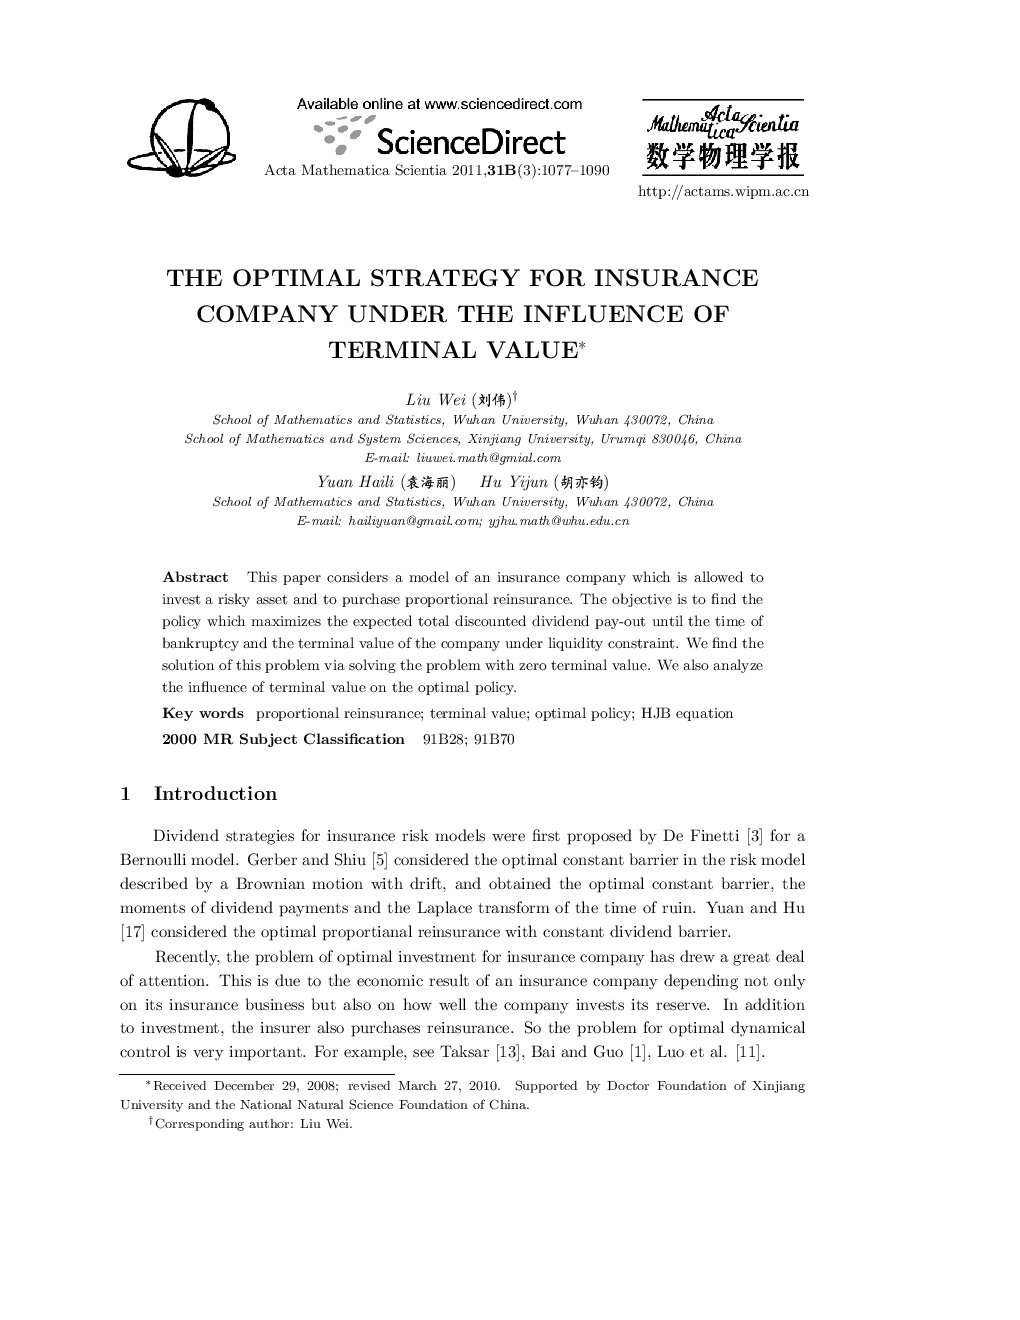 The optimal strategy for insurance company under the influence of terminal value 